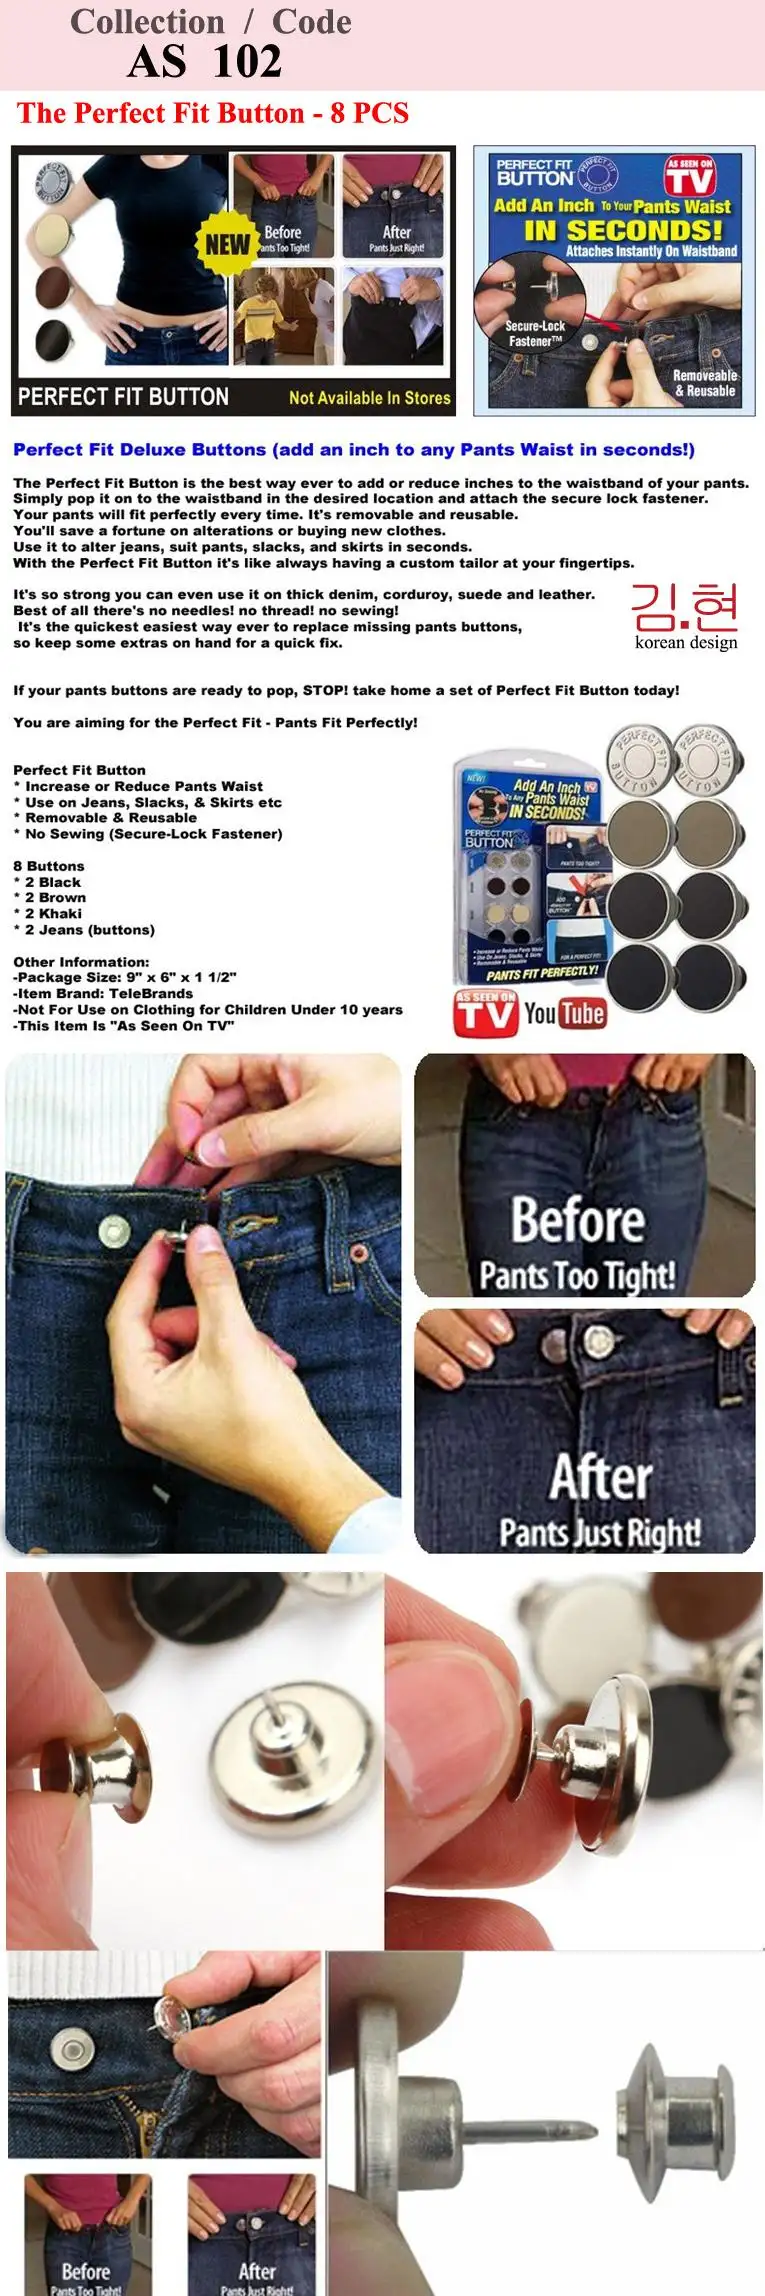 perfect fit jeans as seen on tv